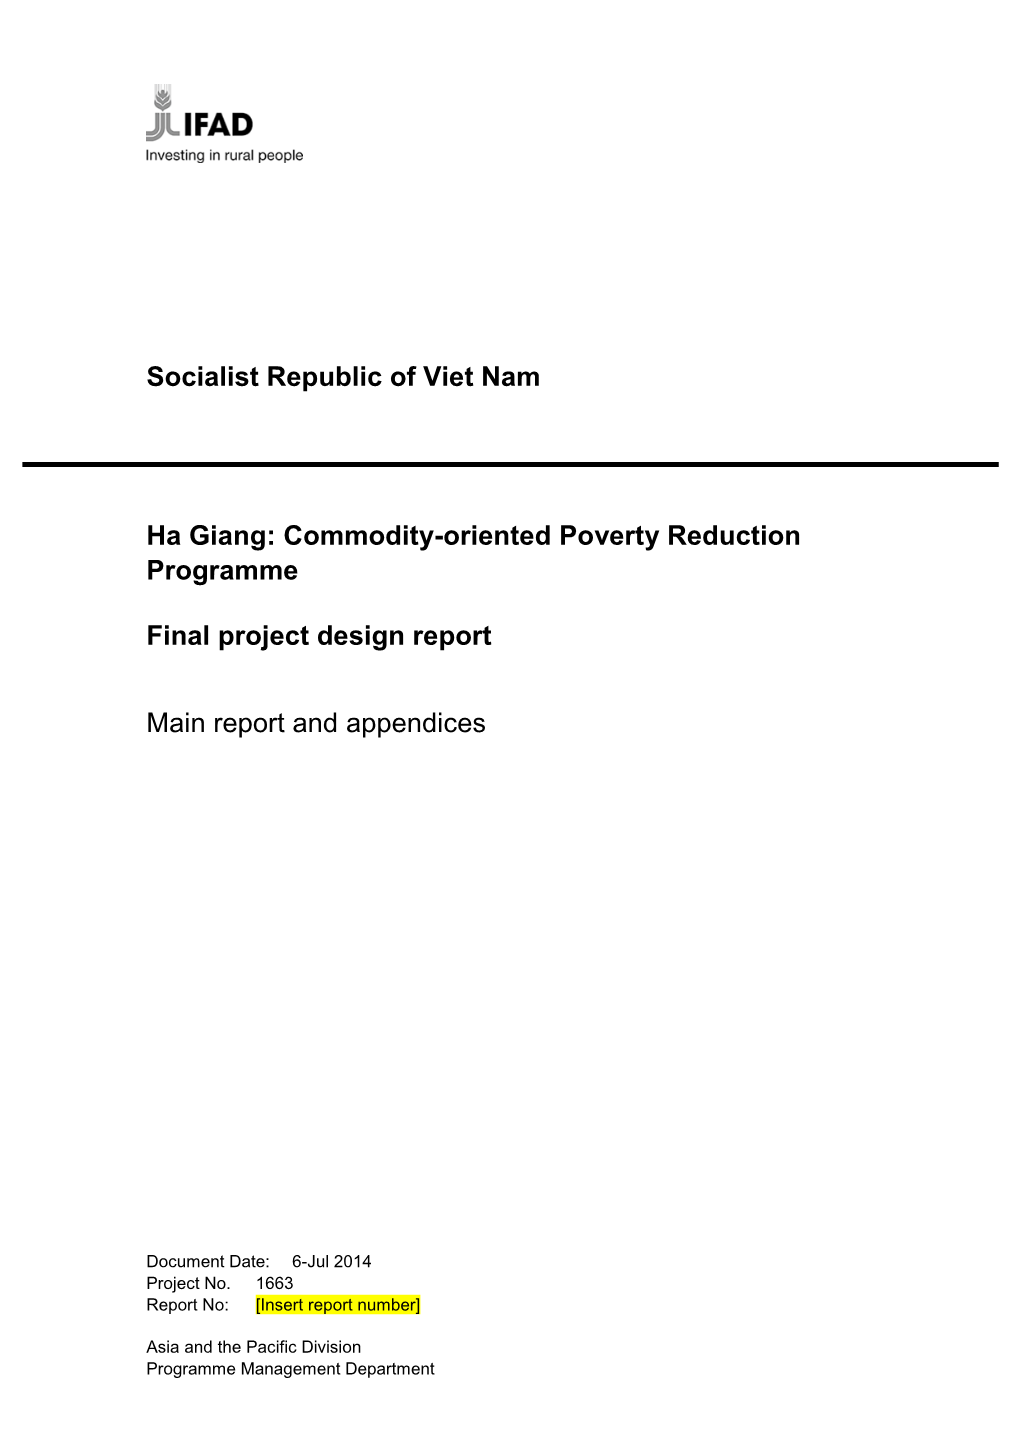 Ha Giang: Commodity-Oriented Poverty Reduction Programme